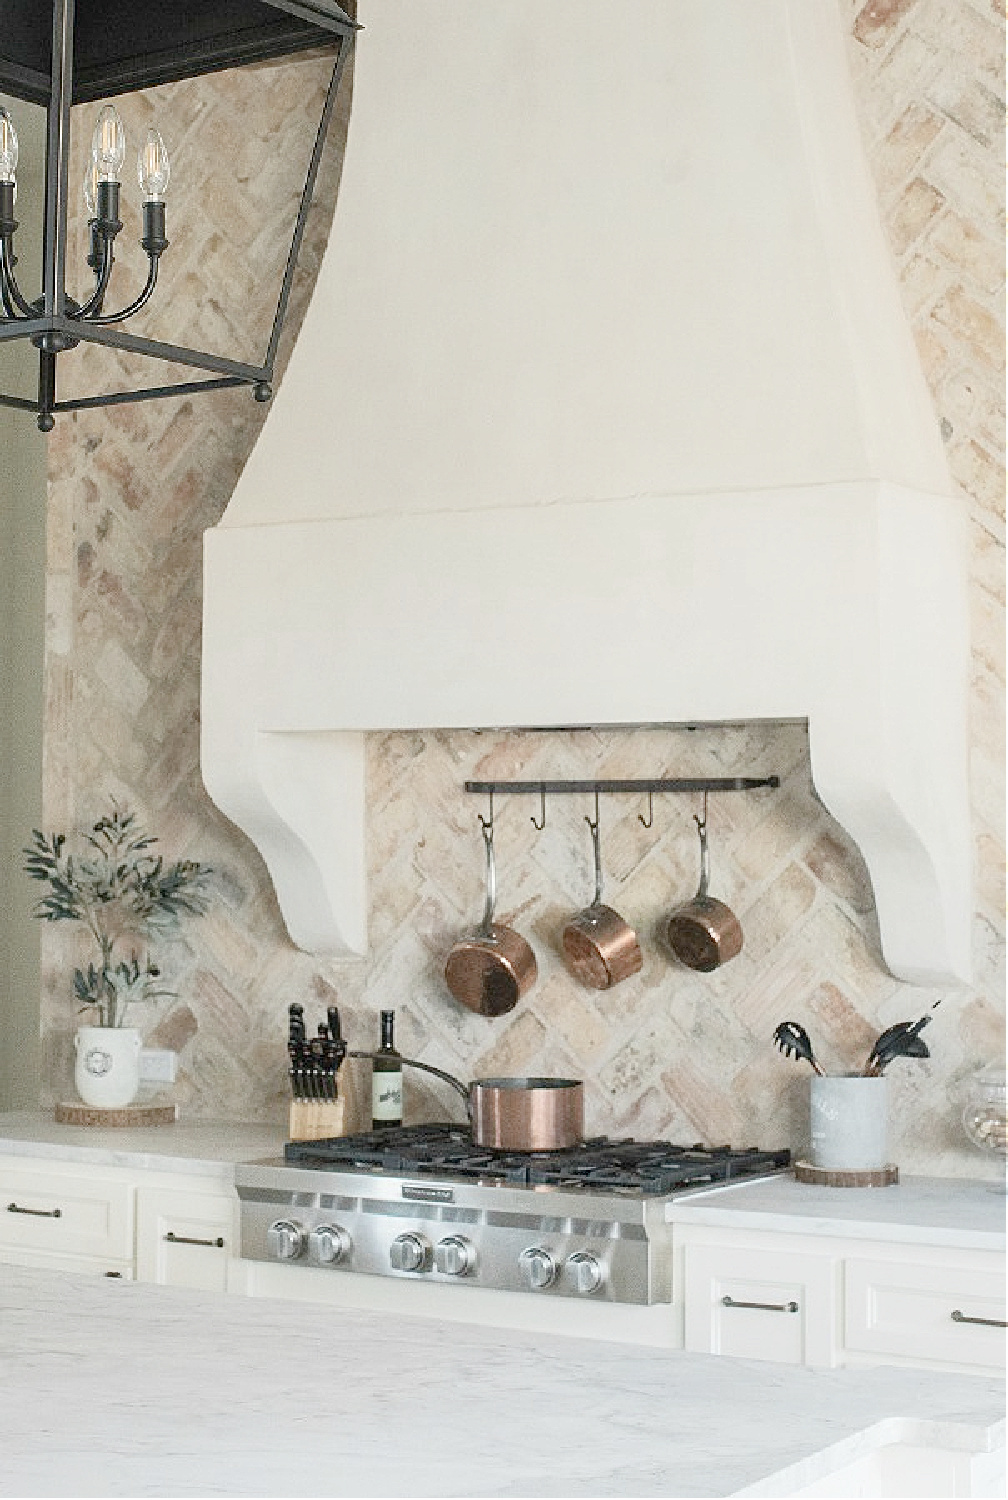 Chicago brick backsplash and custom French country range hood with copper pots on rack beneath in a country French kitchen by Brit Jones Design.